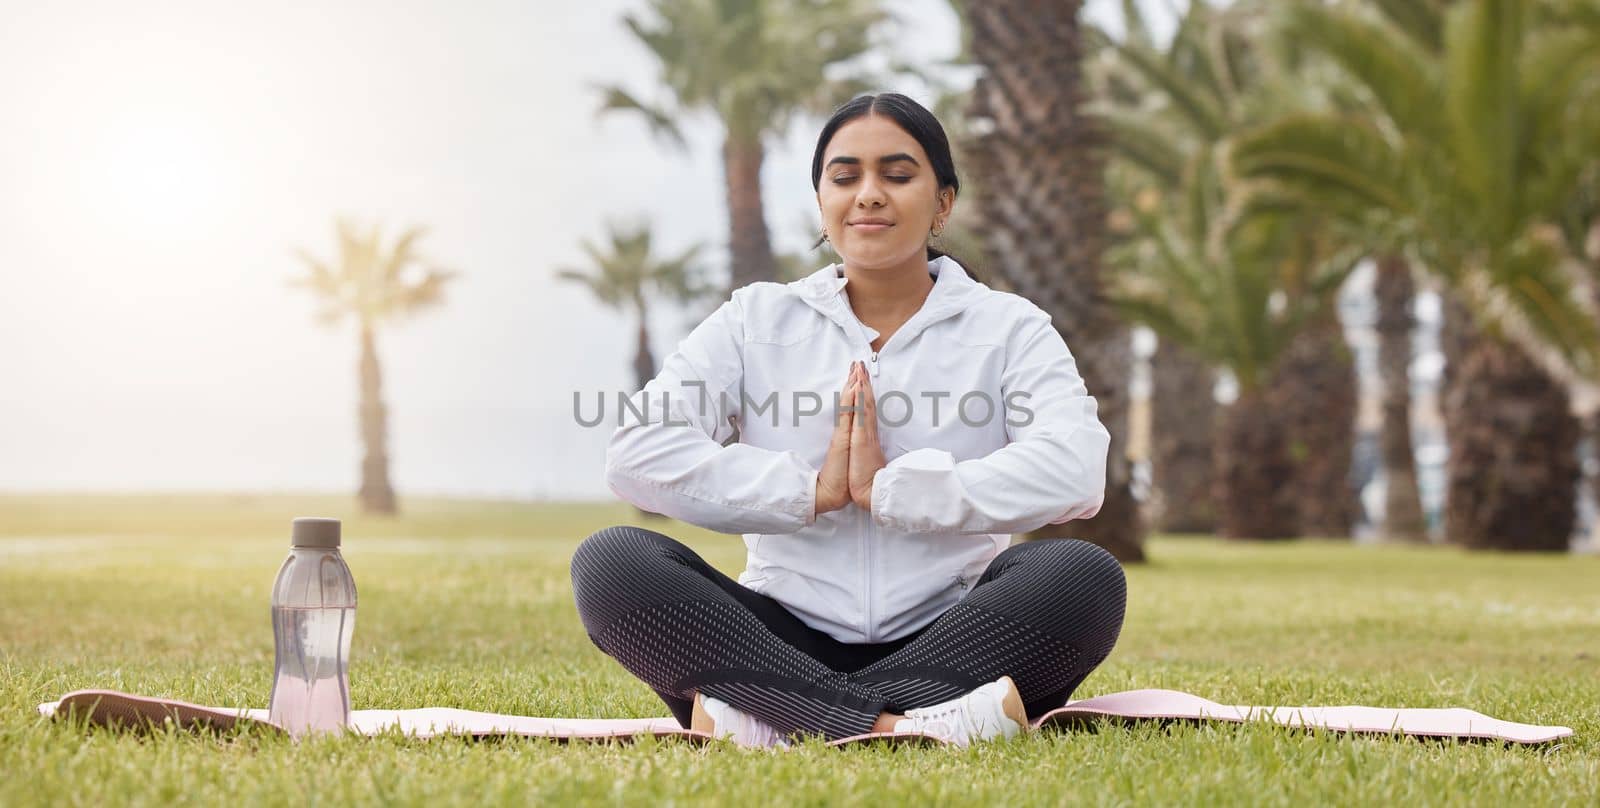 Fitness, meditation and yoga with woman in park for peace, zen and breathing exercise. Relax, energy and freedom with girl training on grass for health, wellness and spiritual summer lifestyle.